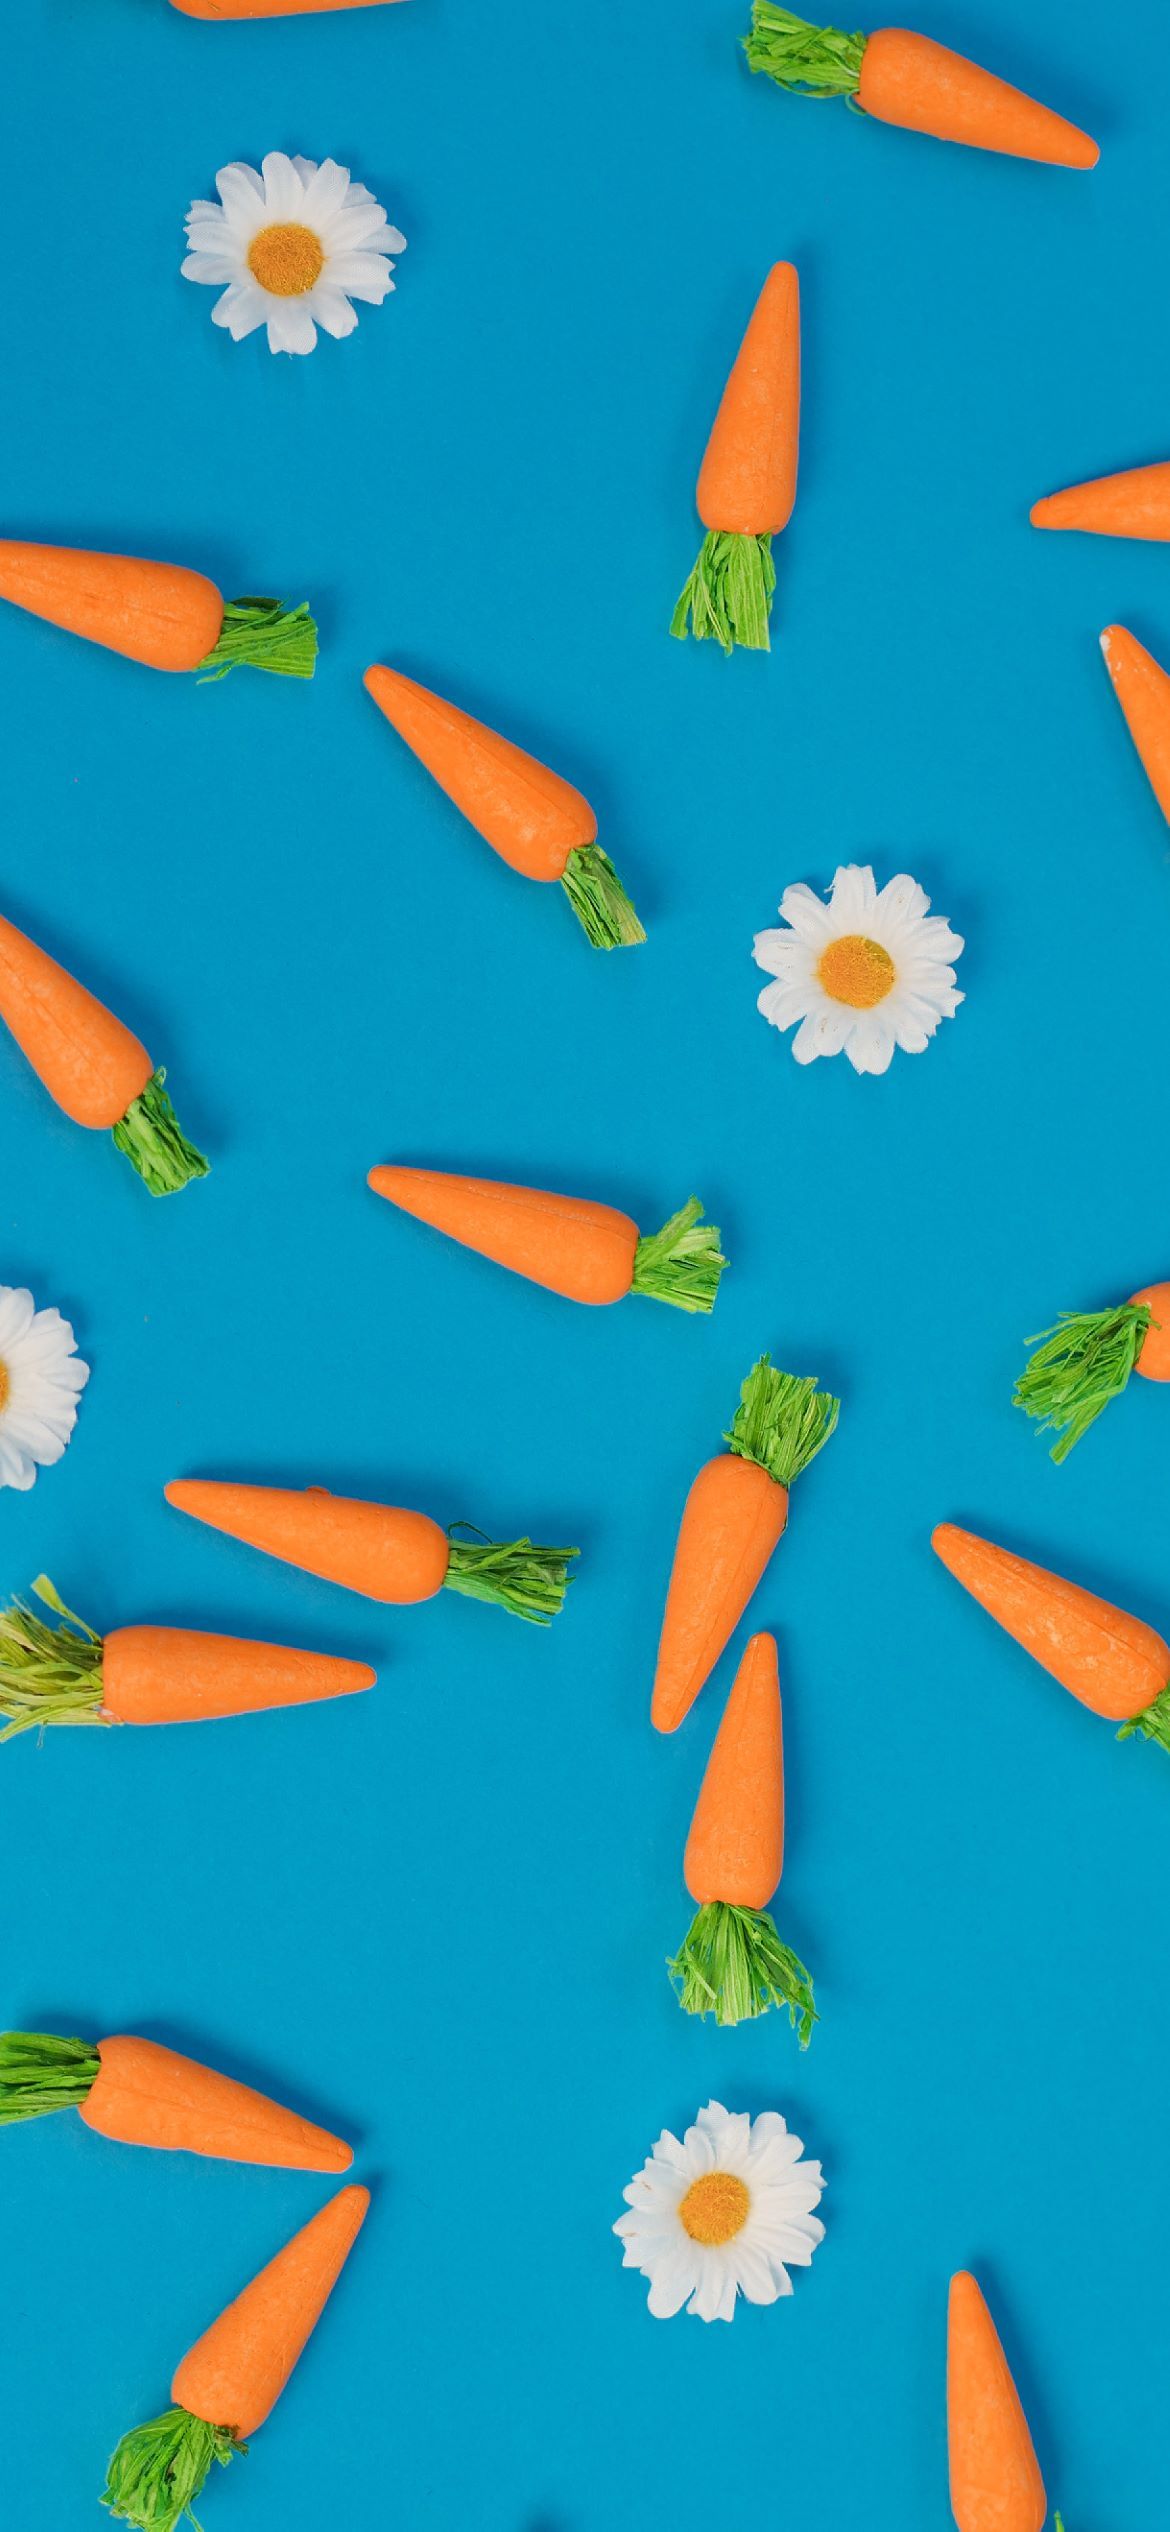 A bunch of carrots and daisies on the ground - Easter